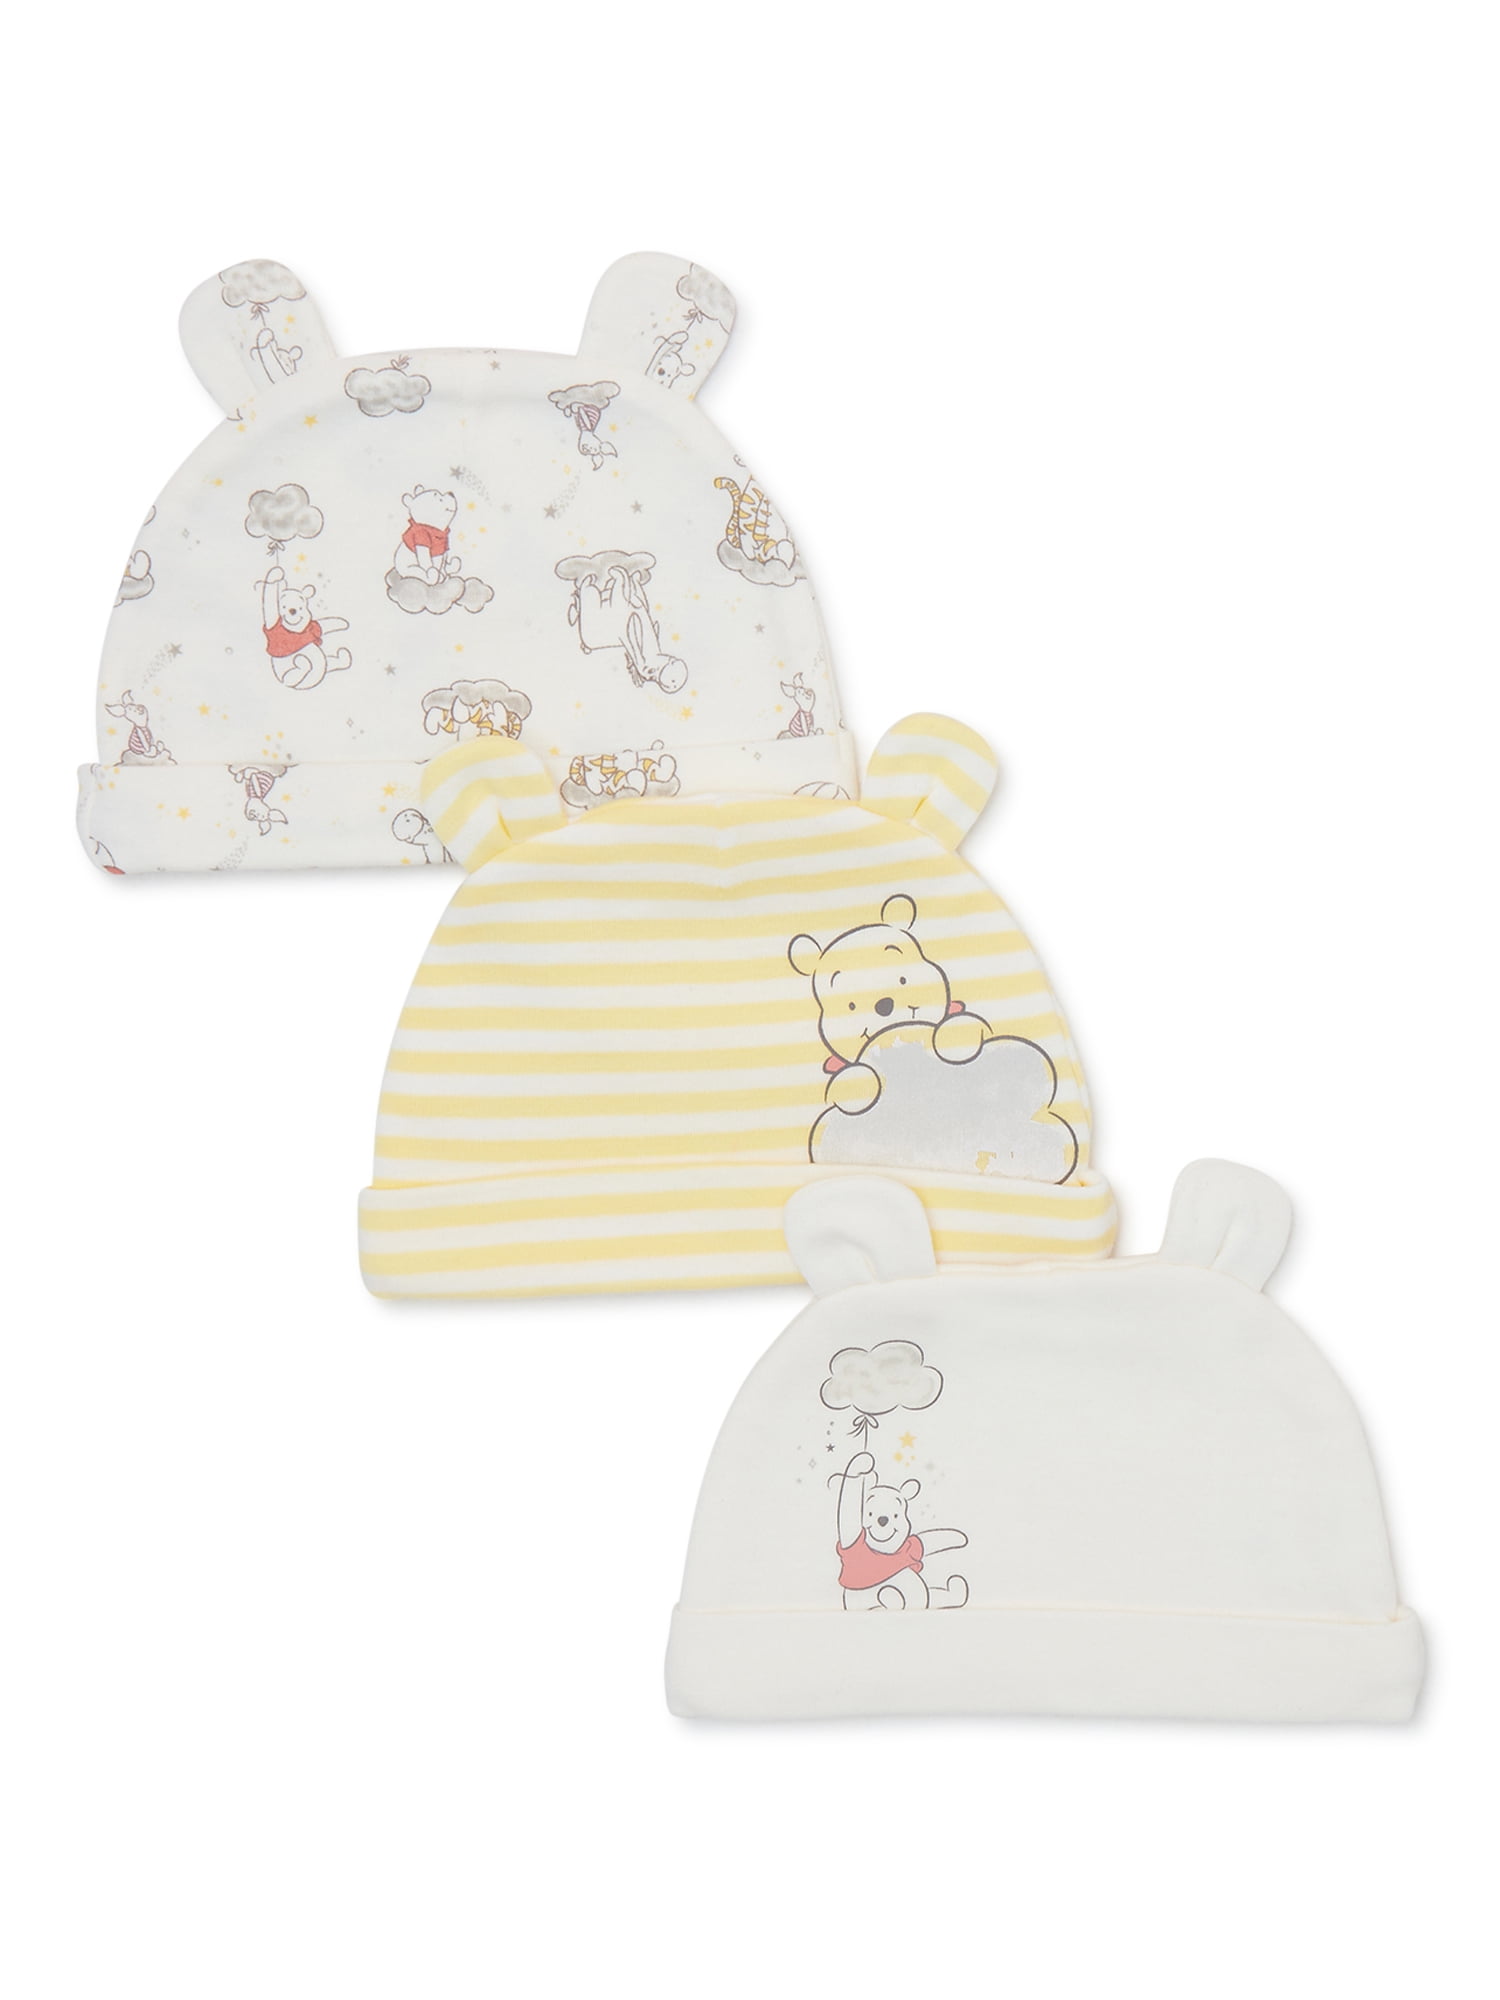 Disney Baby Wishes + Dreams Winnie the Pooh Baby Boys and Girls Unisex Caps, 3-Pack, Sizes 0-12 Months